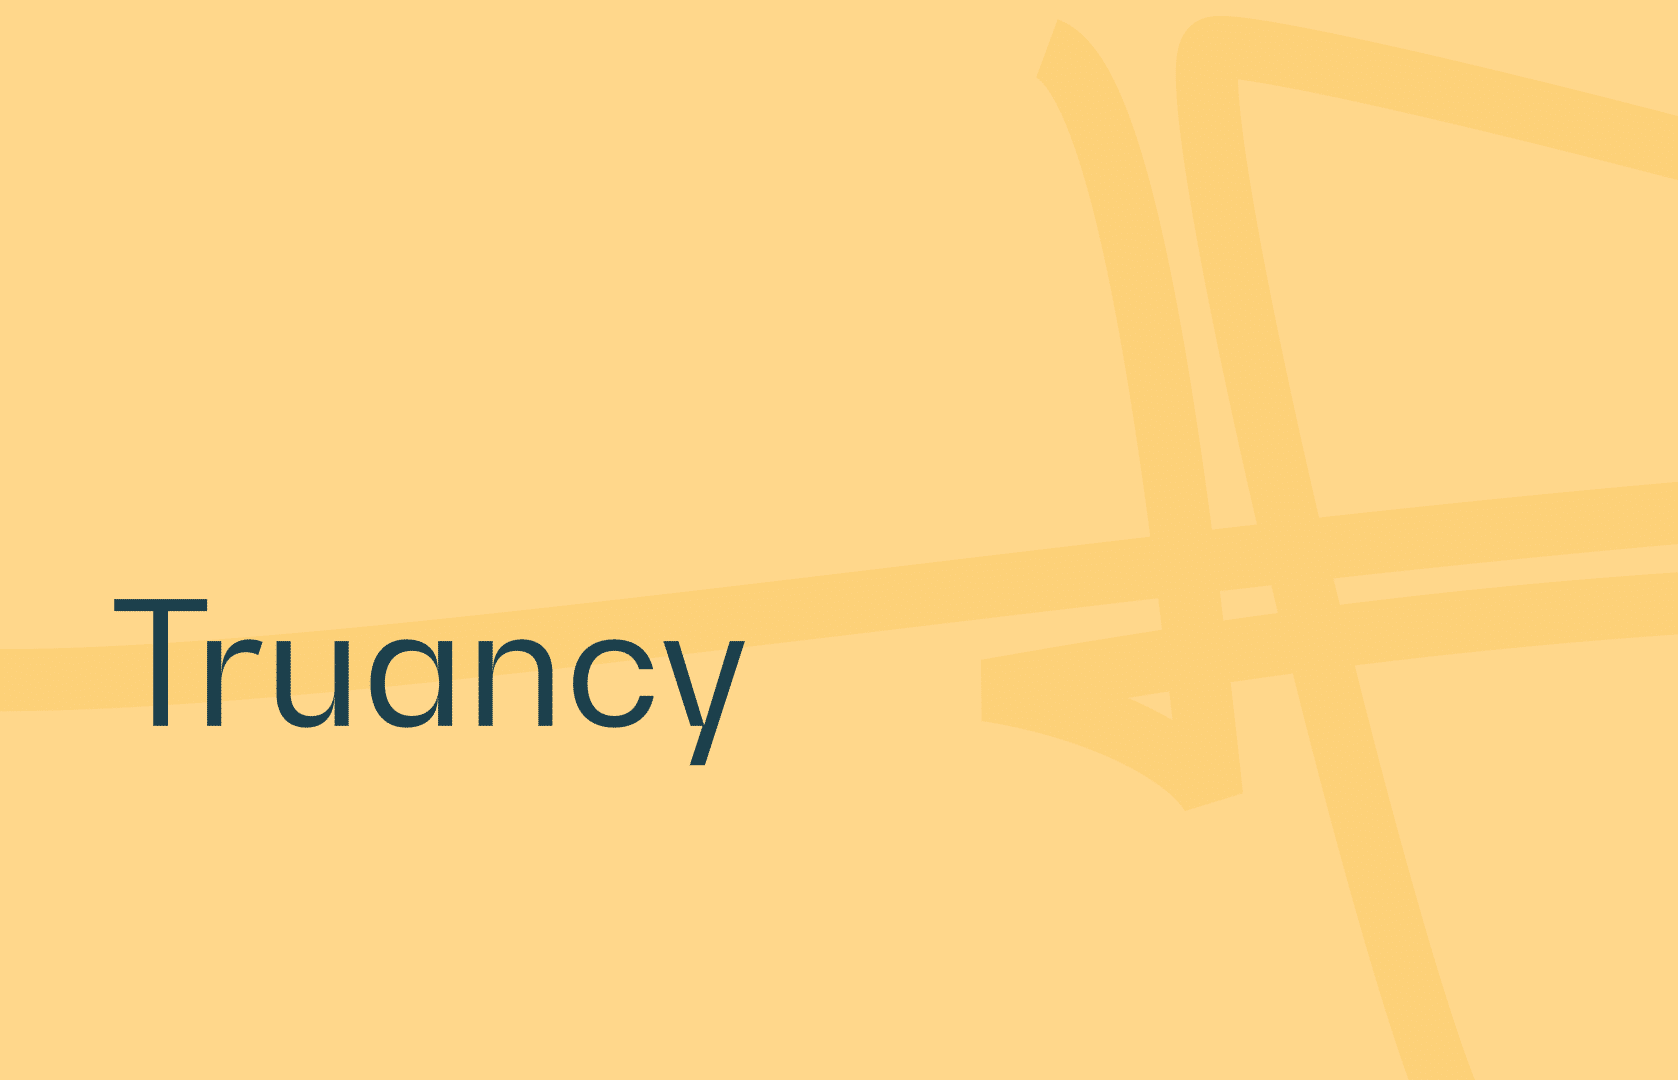 Truancy definition and explanation